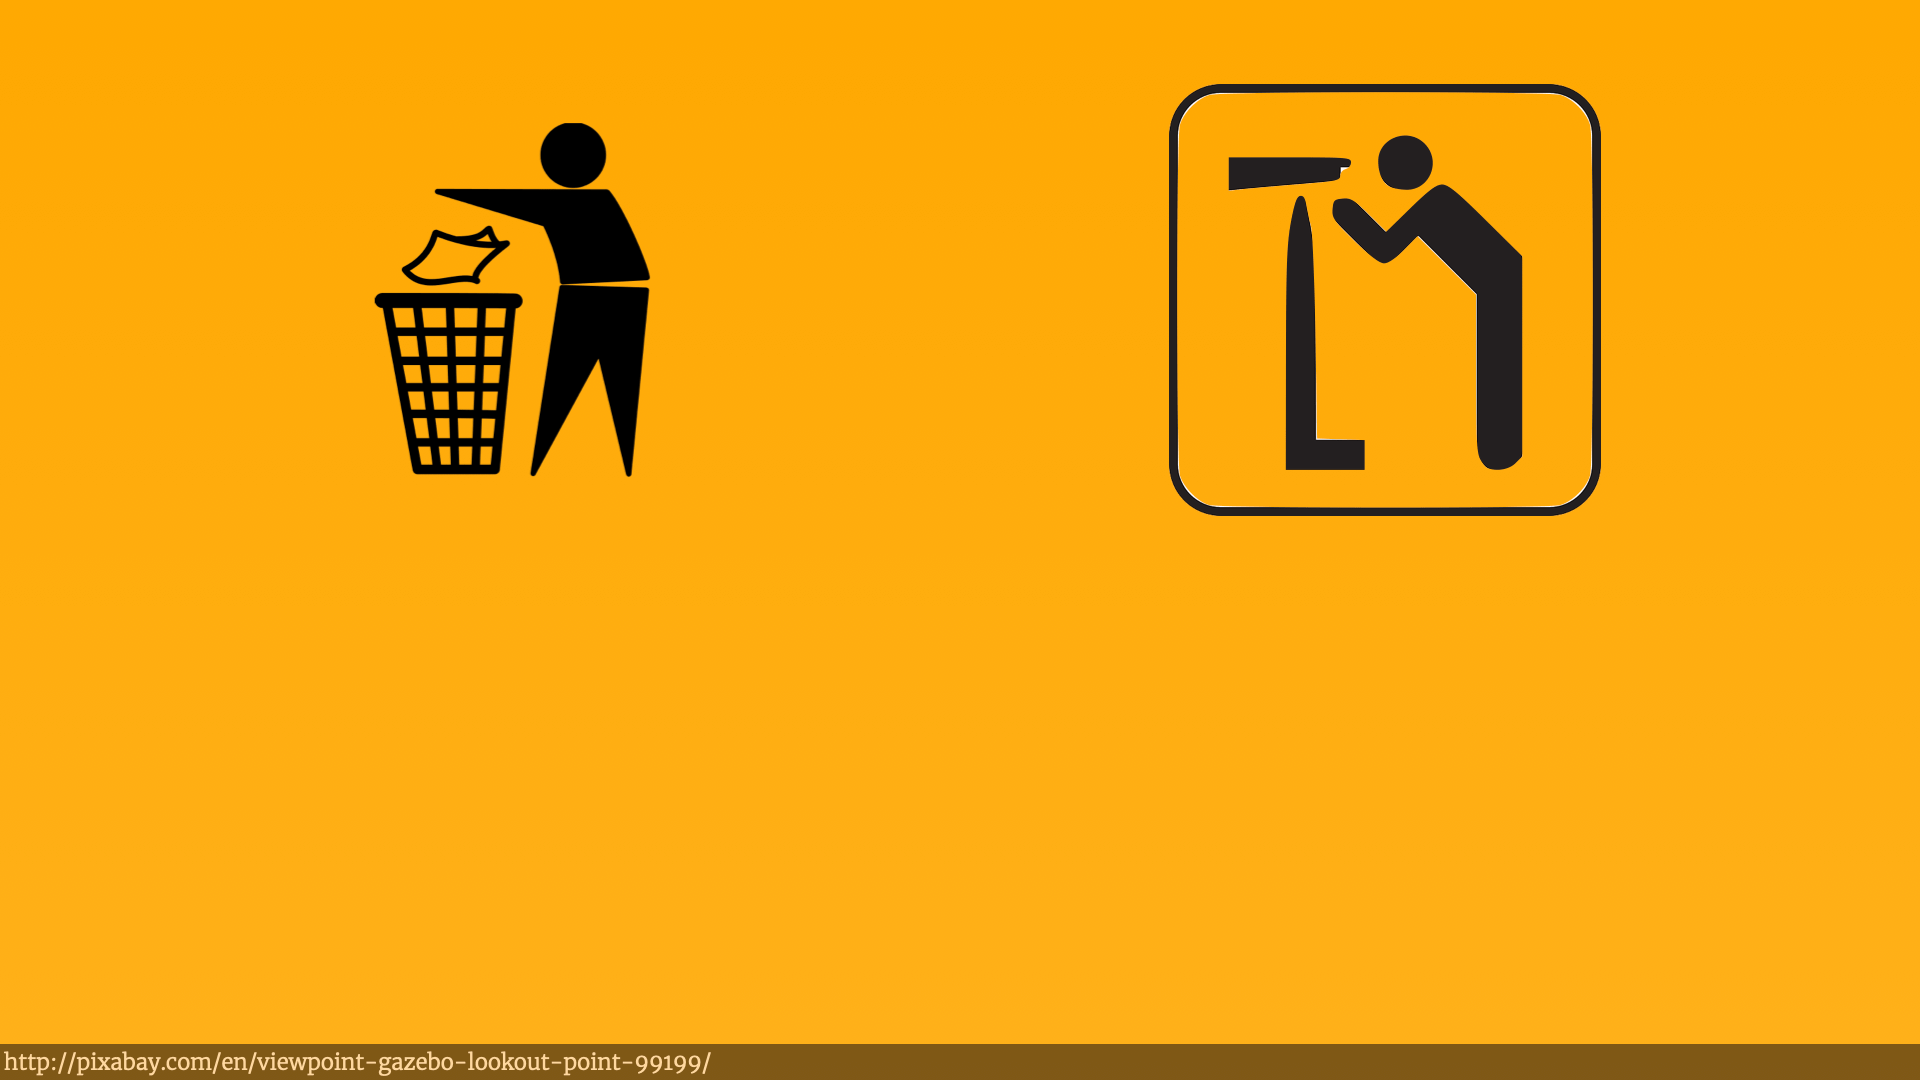 Two illustrations. To the left somebody throwing something into a bin. To the right somebody looking through a telescope.